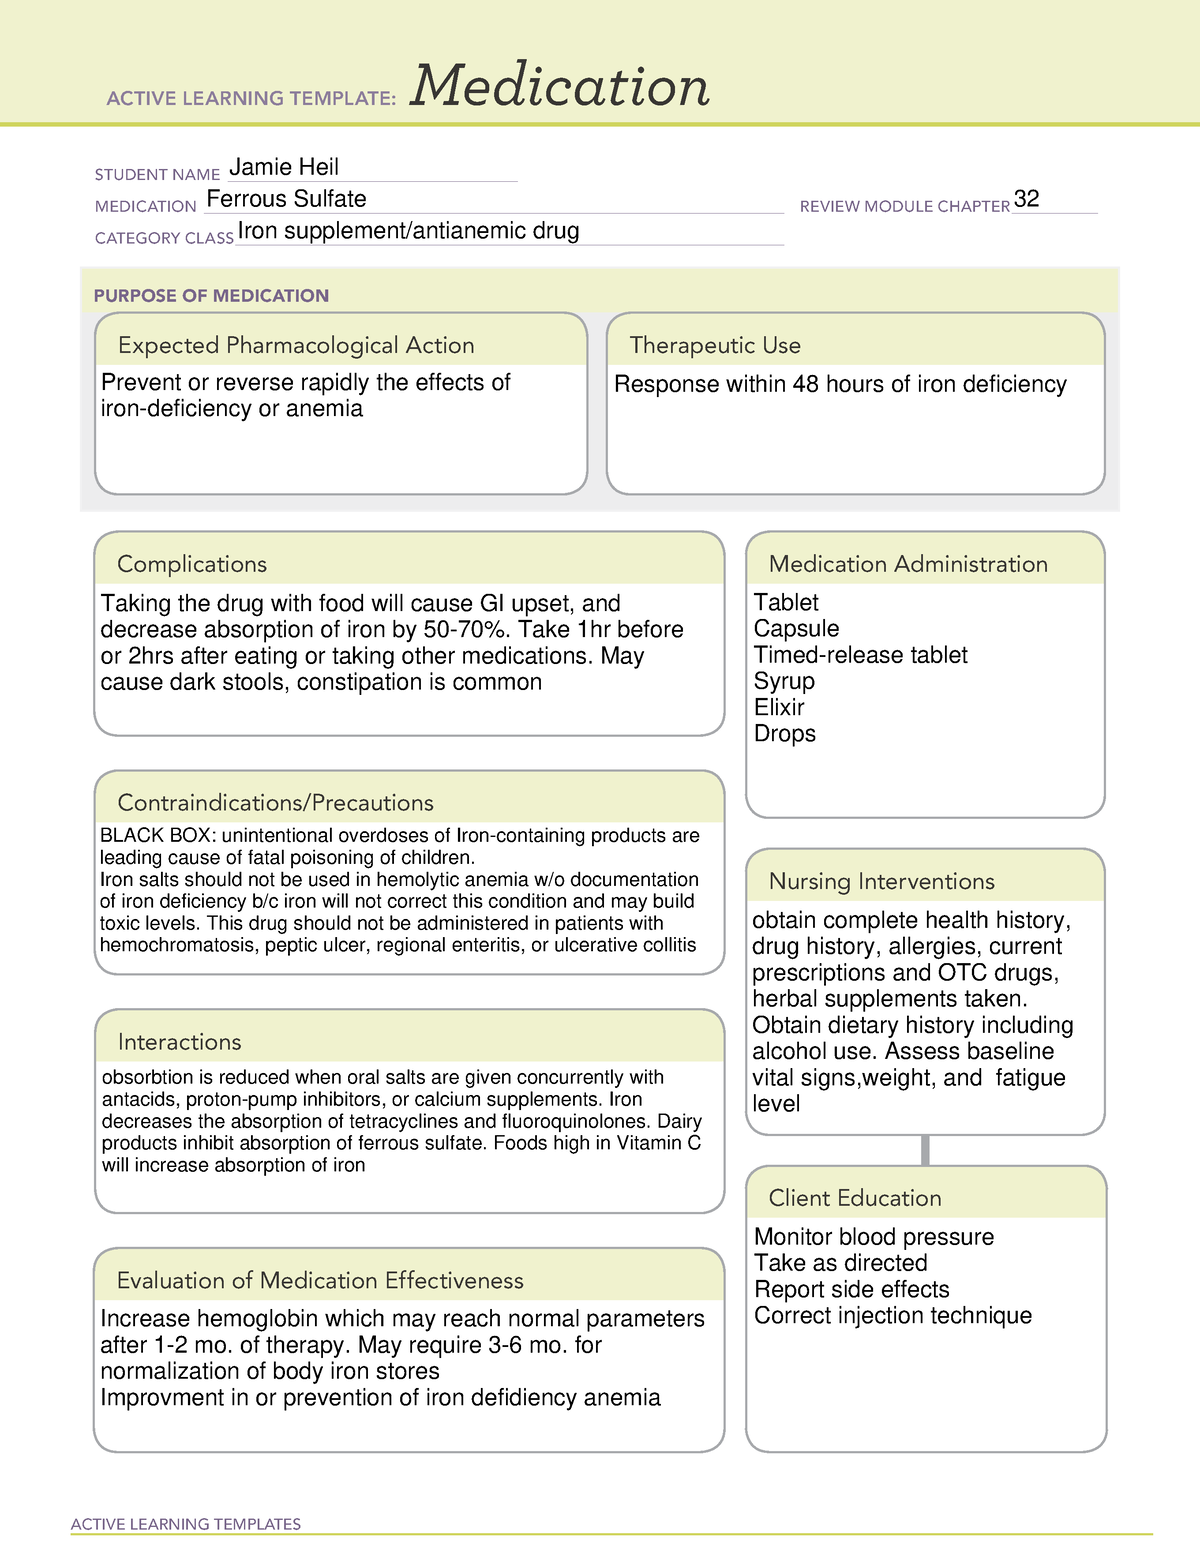 ferrous-sulfate-medication-card-active-learning-templates-medication-student-name-studocu